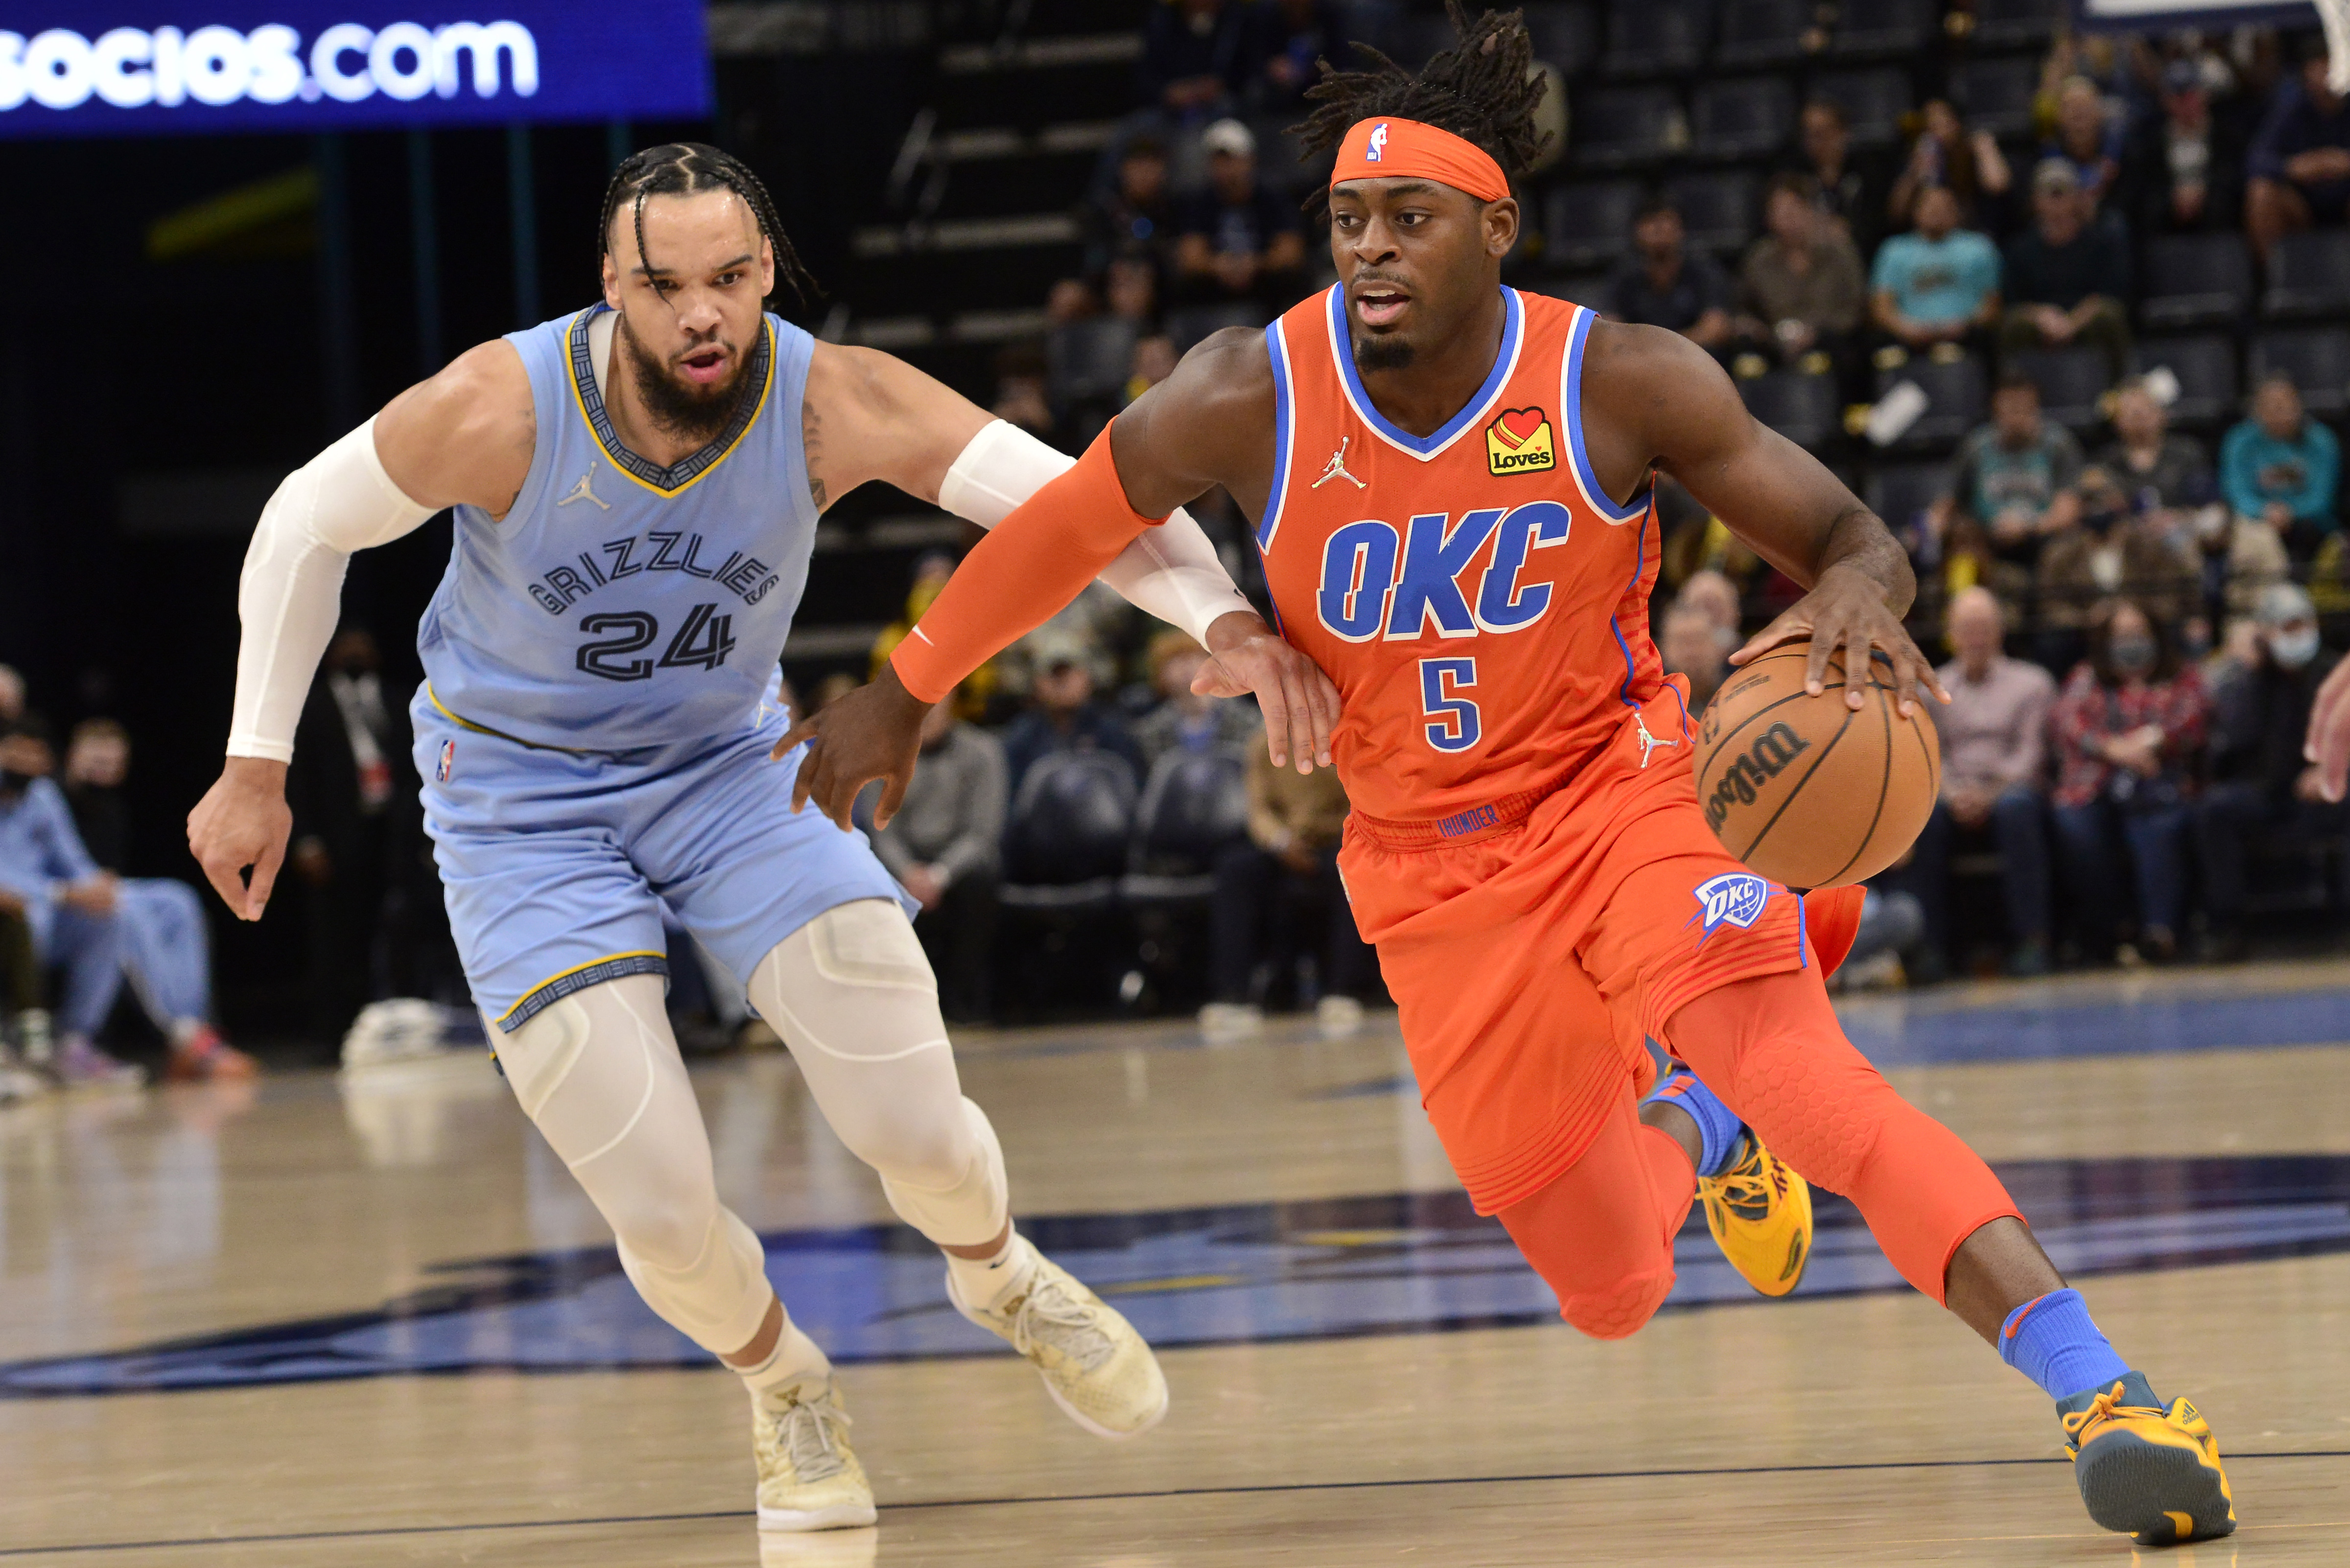 Grizzlies set NBA record with 73-point victory over Thunder